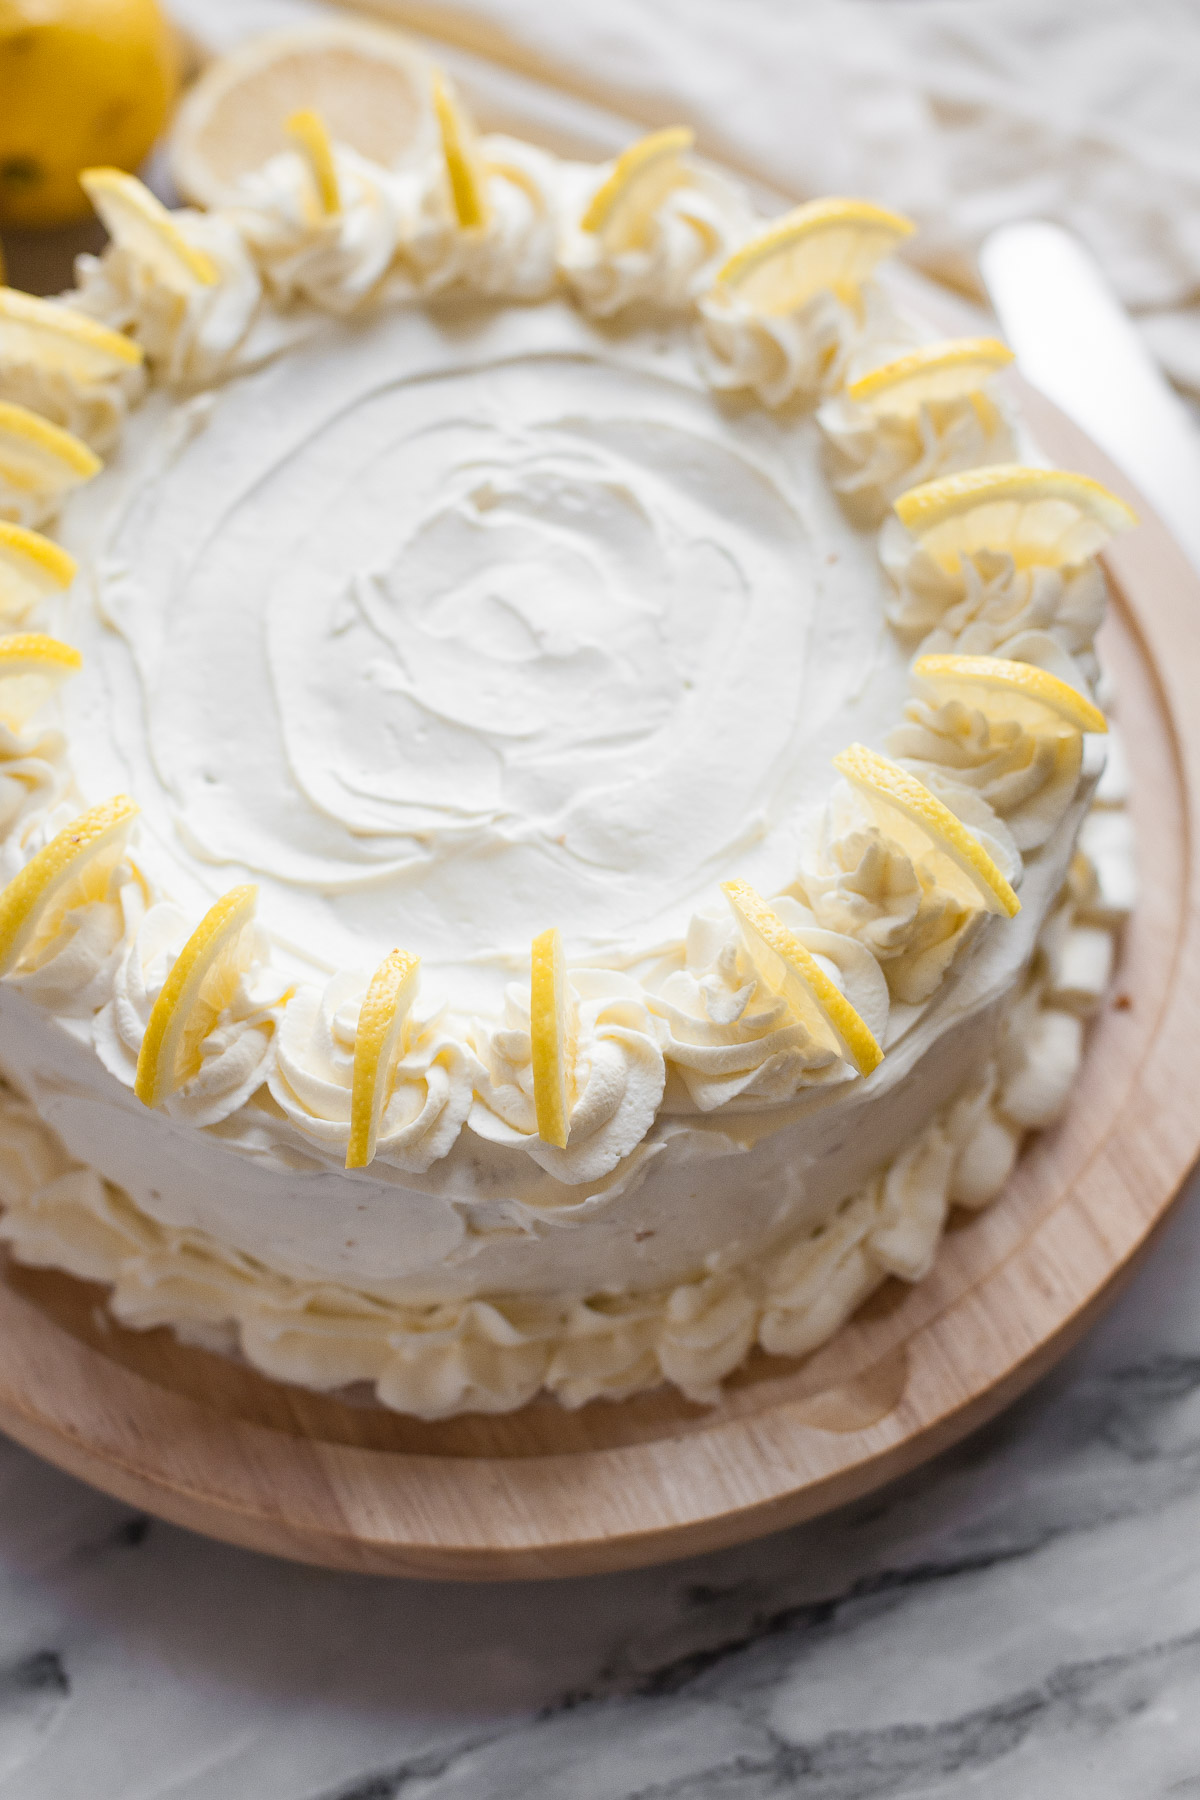 Grain-free Triple Lemon Layer Cake with Whipped Cream Frosting